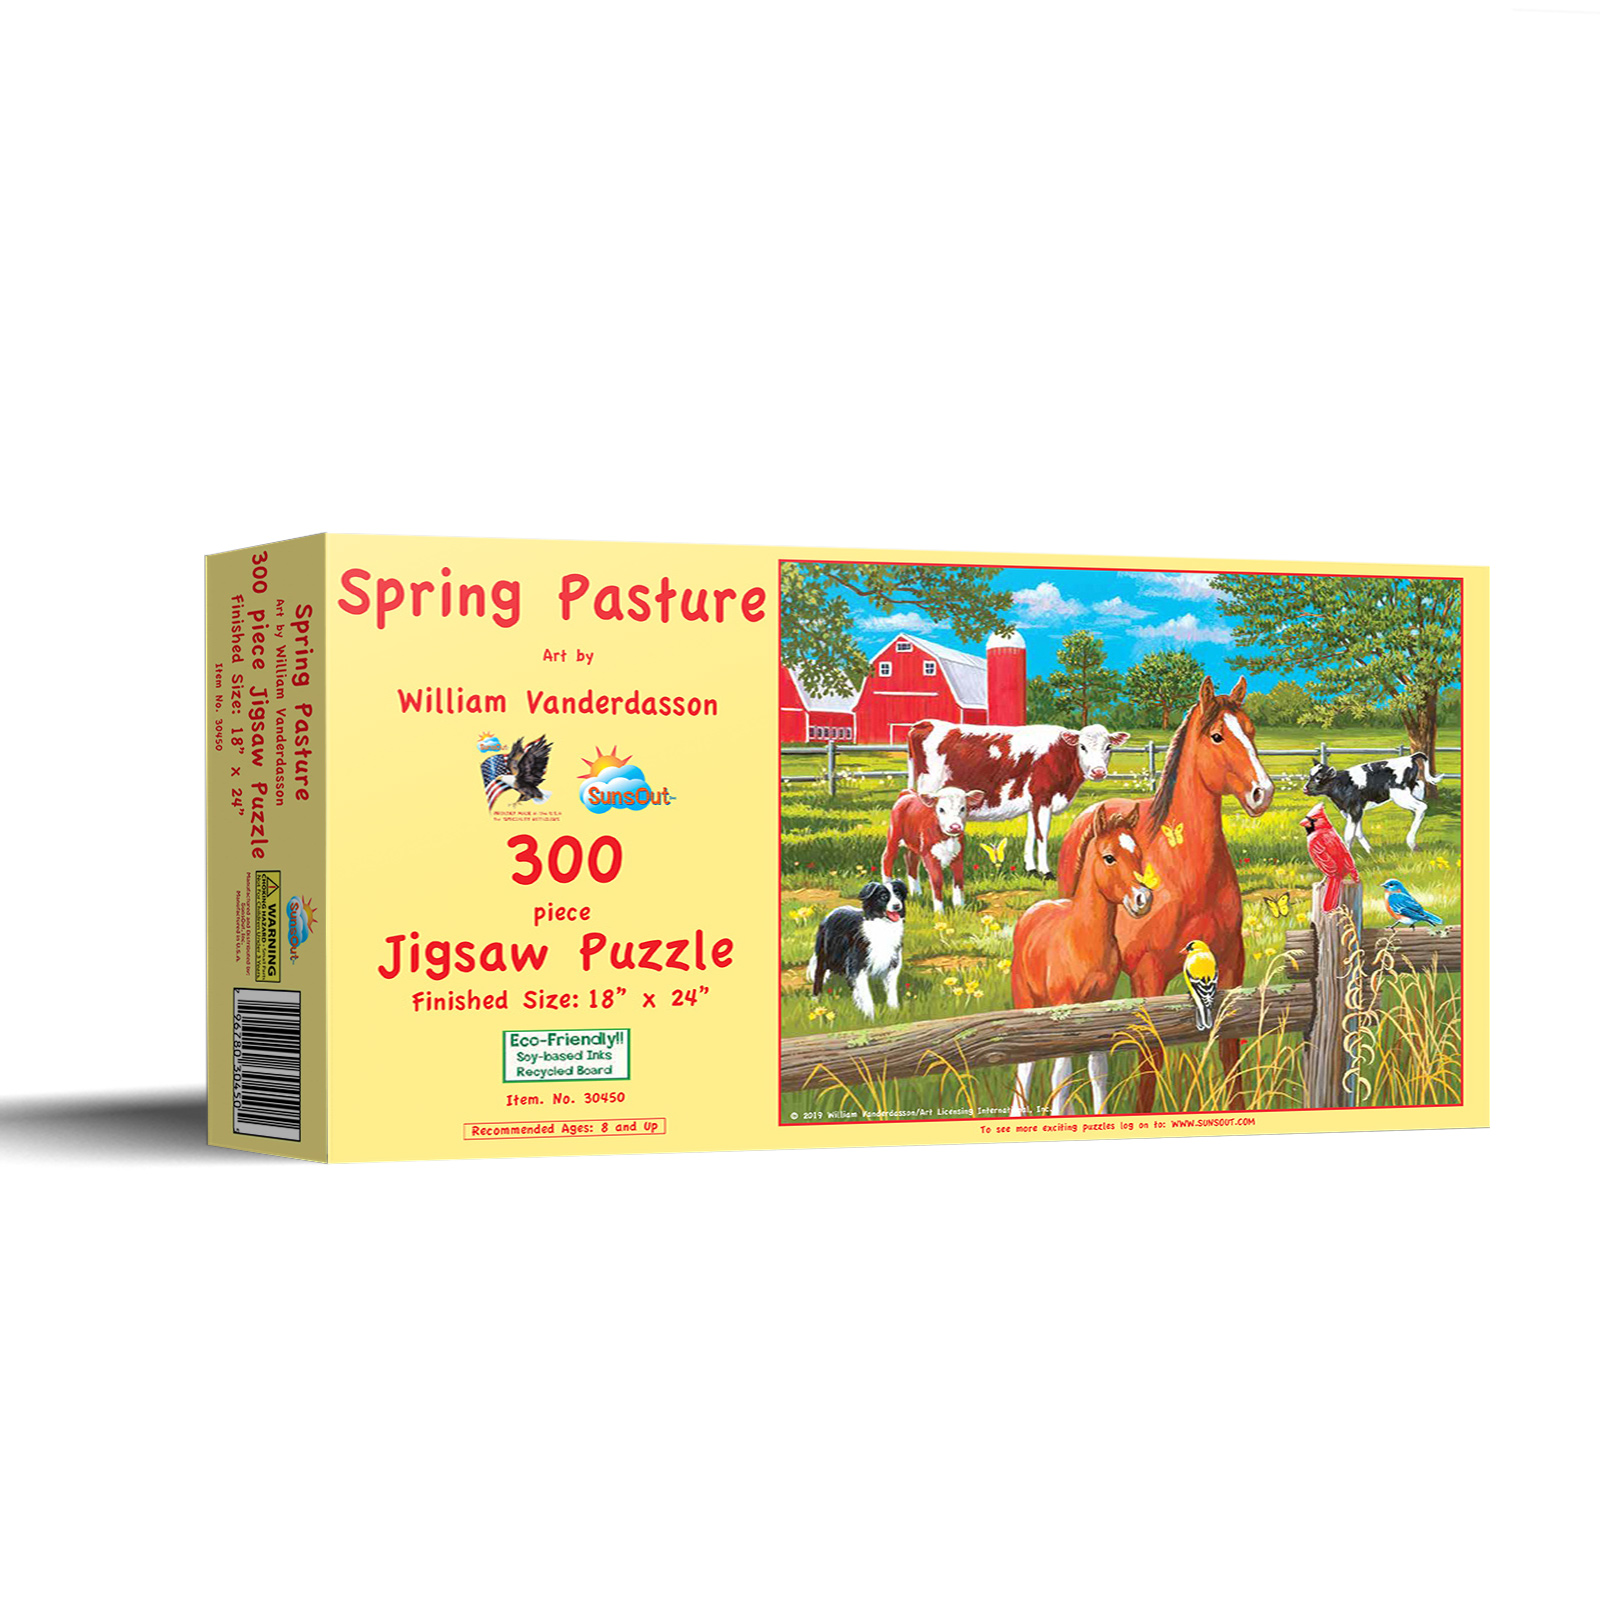 SUNSOUT INC - Spring Pasture - 300 pc Jigsaw Puzzle by Artist: William Vanderdasson - Finished Size 18" x 24" - MPN# 30450 - image 2 of 5